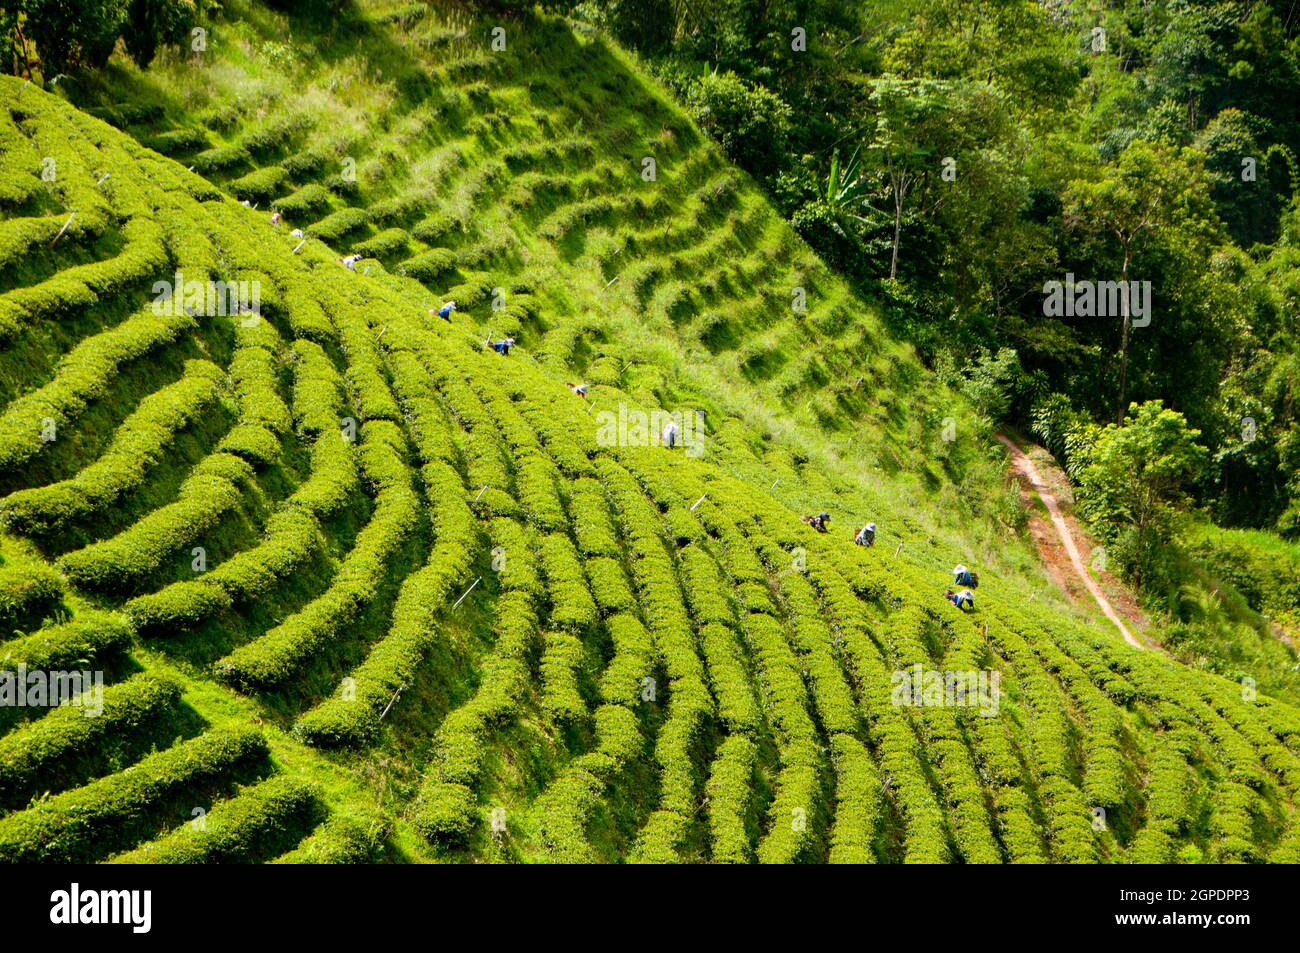 Thailand: Tea plantations near Doi Mae Salong (Santikhiri), Chiang Rai Province, northern Thailand. Doi Mae Salong was once an impoverished, heavily-armed Kuomintang (KMT) outpost, it is today a tranquil oasis of tea gardens, fruit orchards and Yunnanese-style houses. Stock Photo